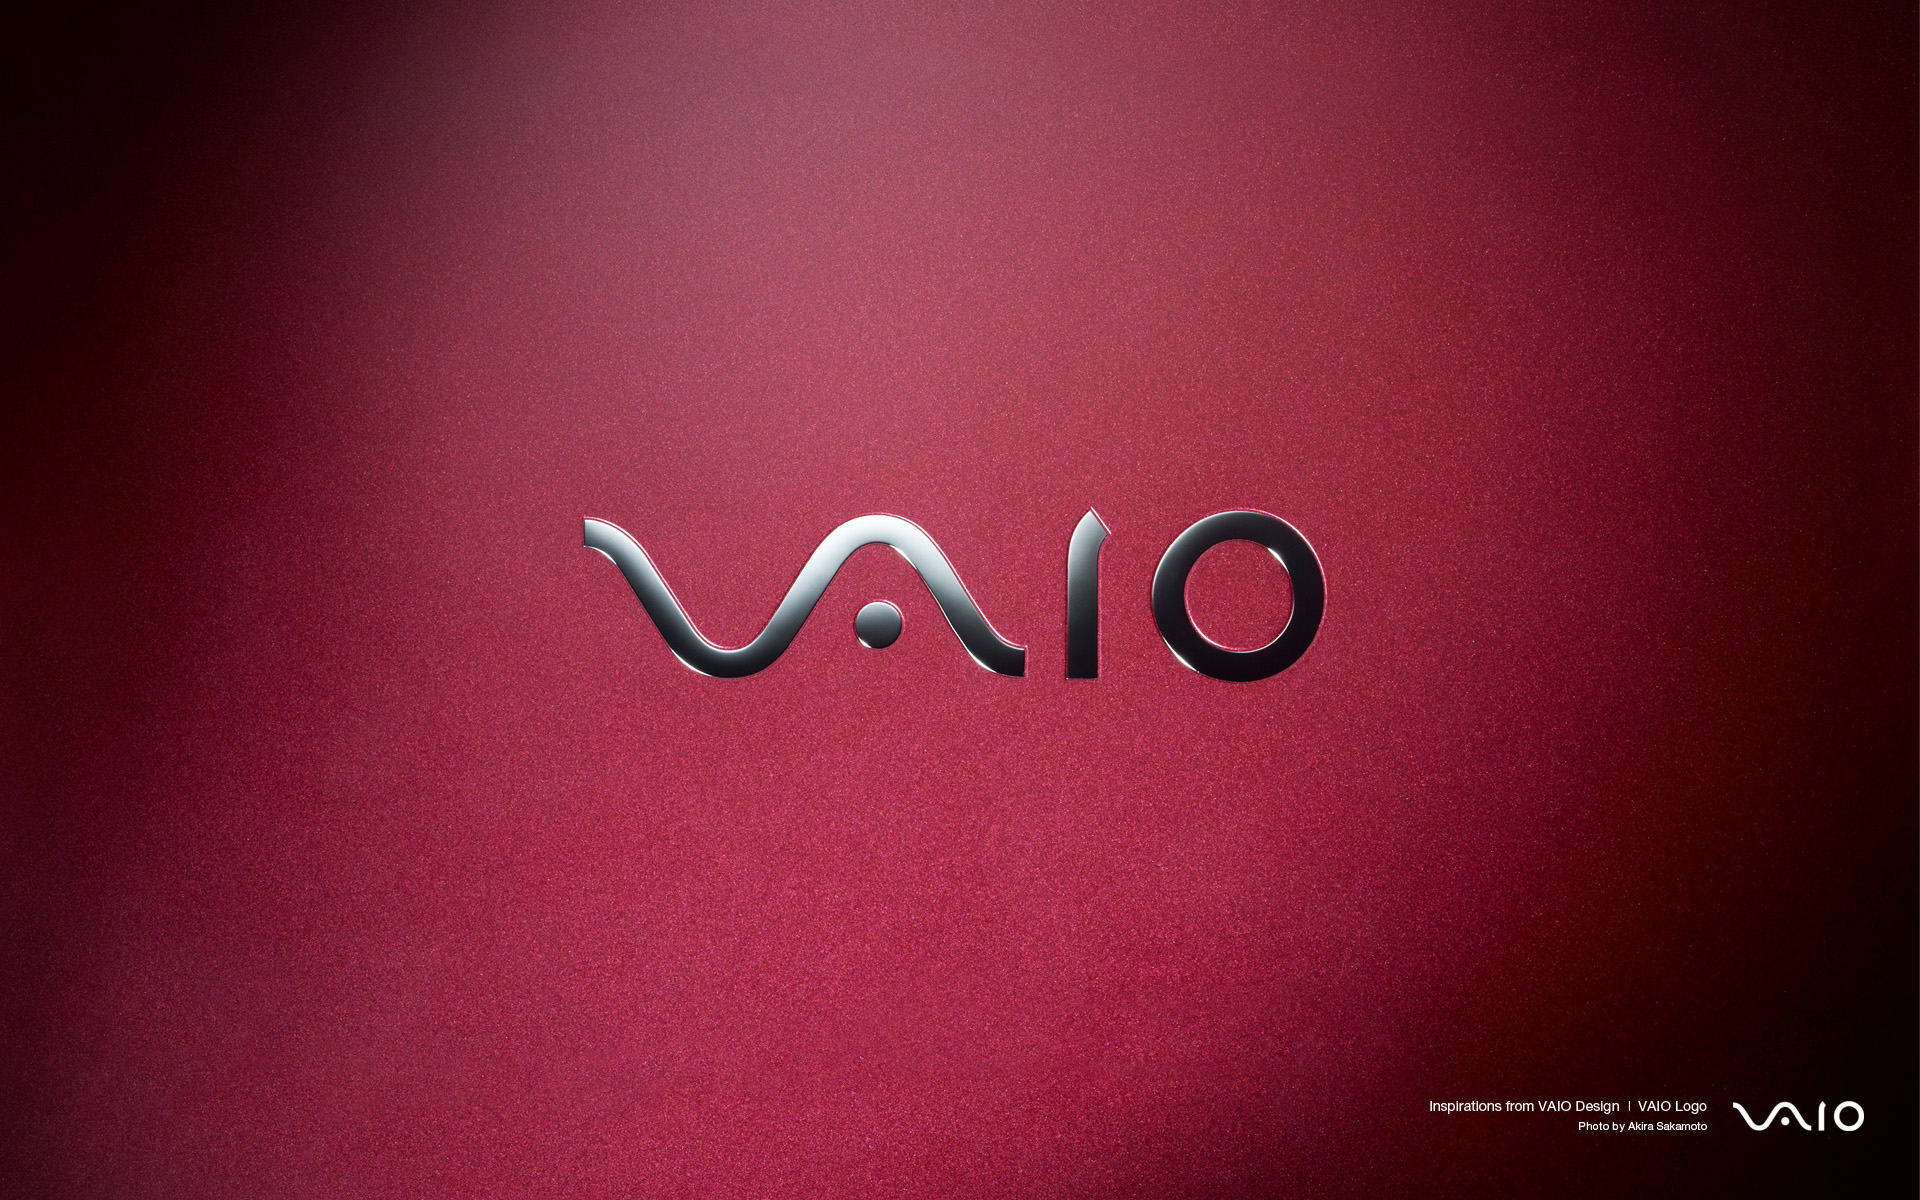 High Quality Vaio Wallpaper That Can Be Downloaded Free Gigazine